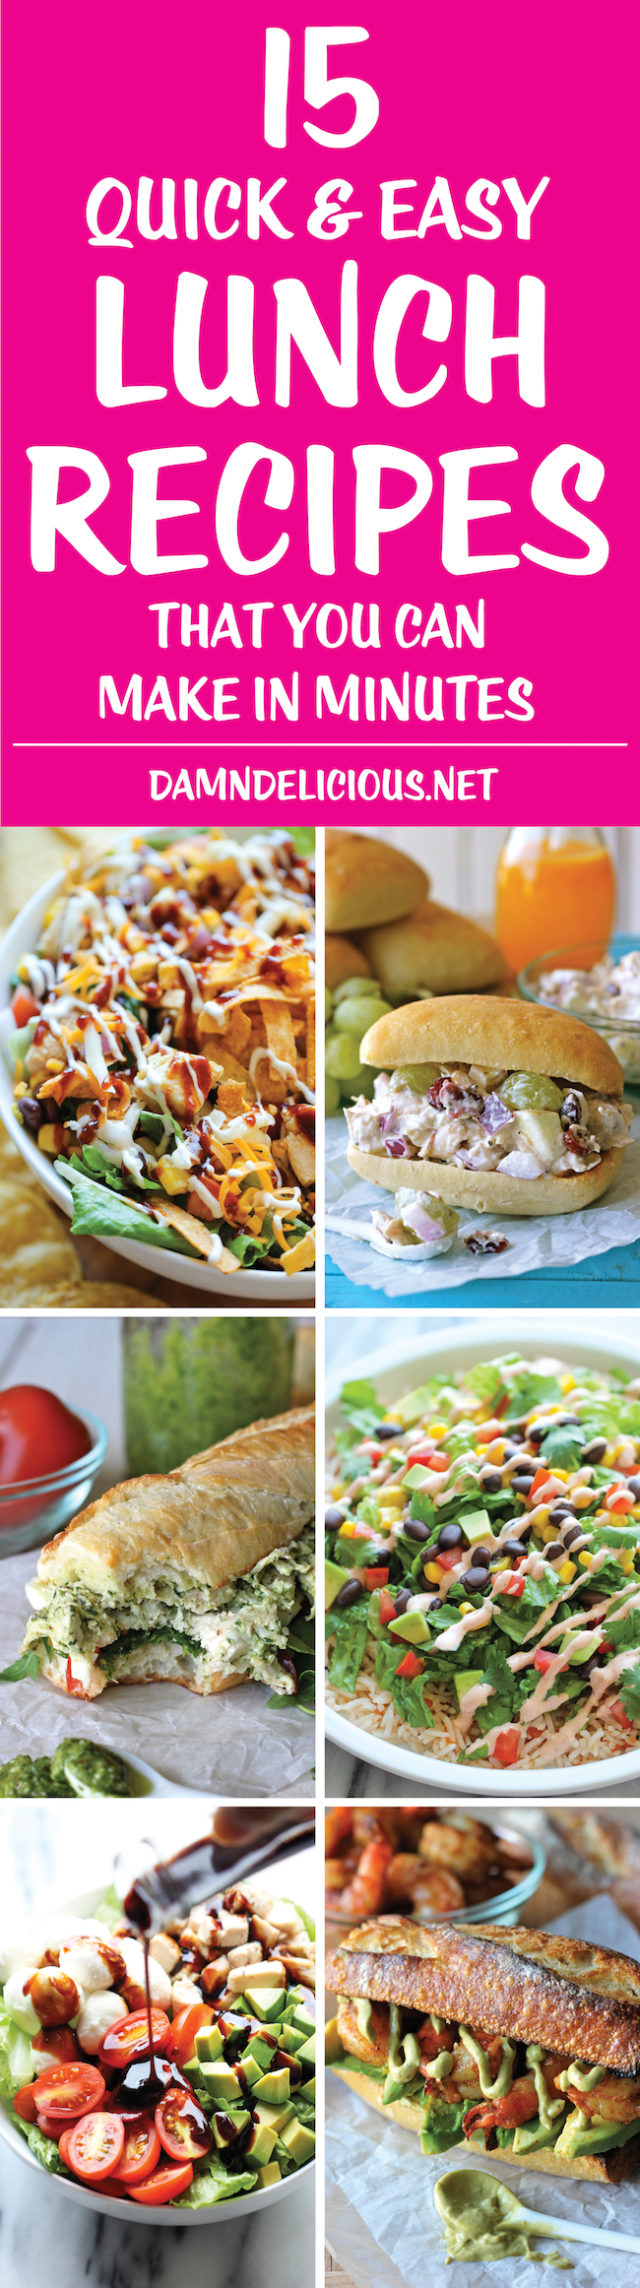 15 Quick and Easy Lunch Recipes - Damn Delicious